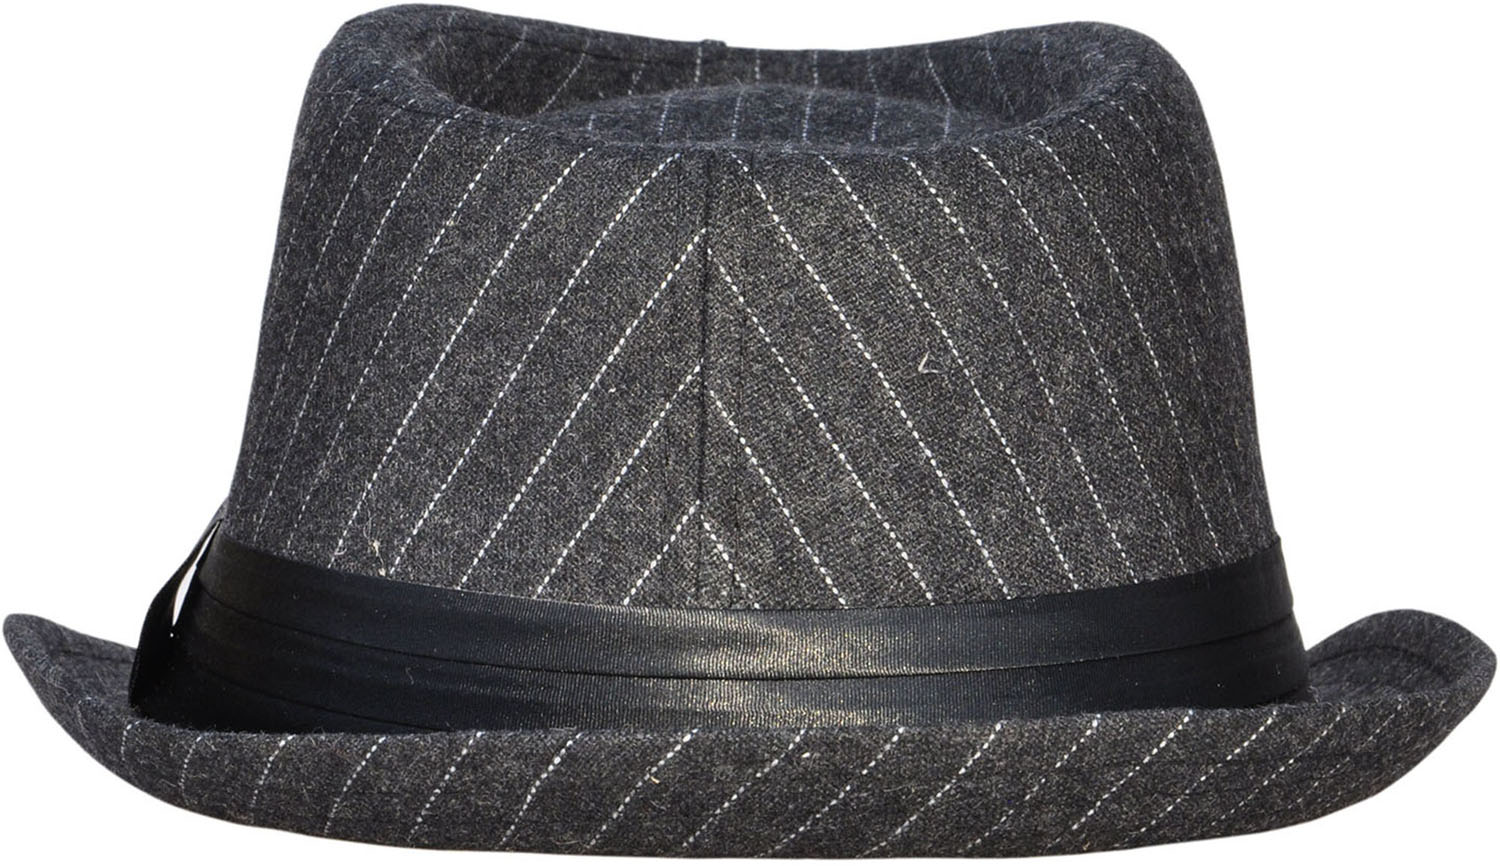 Simplicity Unisex Structured Gangster Trilby Wool Fedora Hat, 3075_Charcoal Gy - image 4 of 4